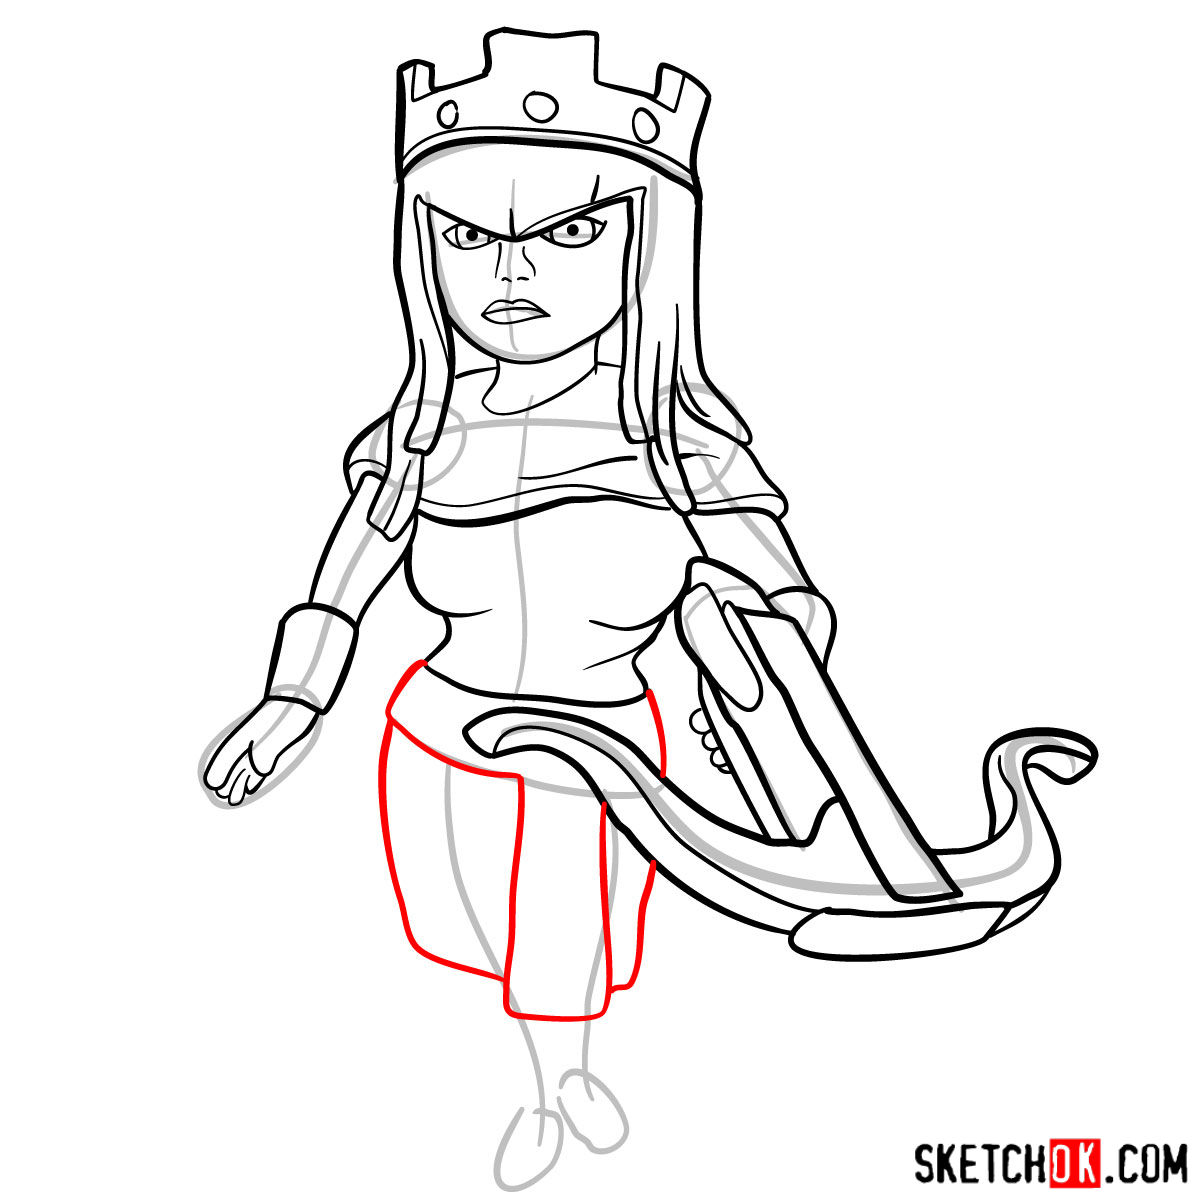 How to draw Archer Queen from Clash of Clans game - step 11